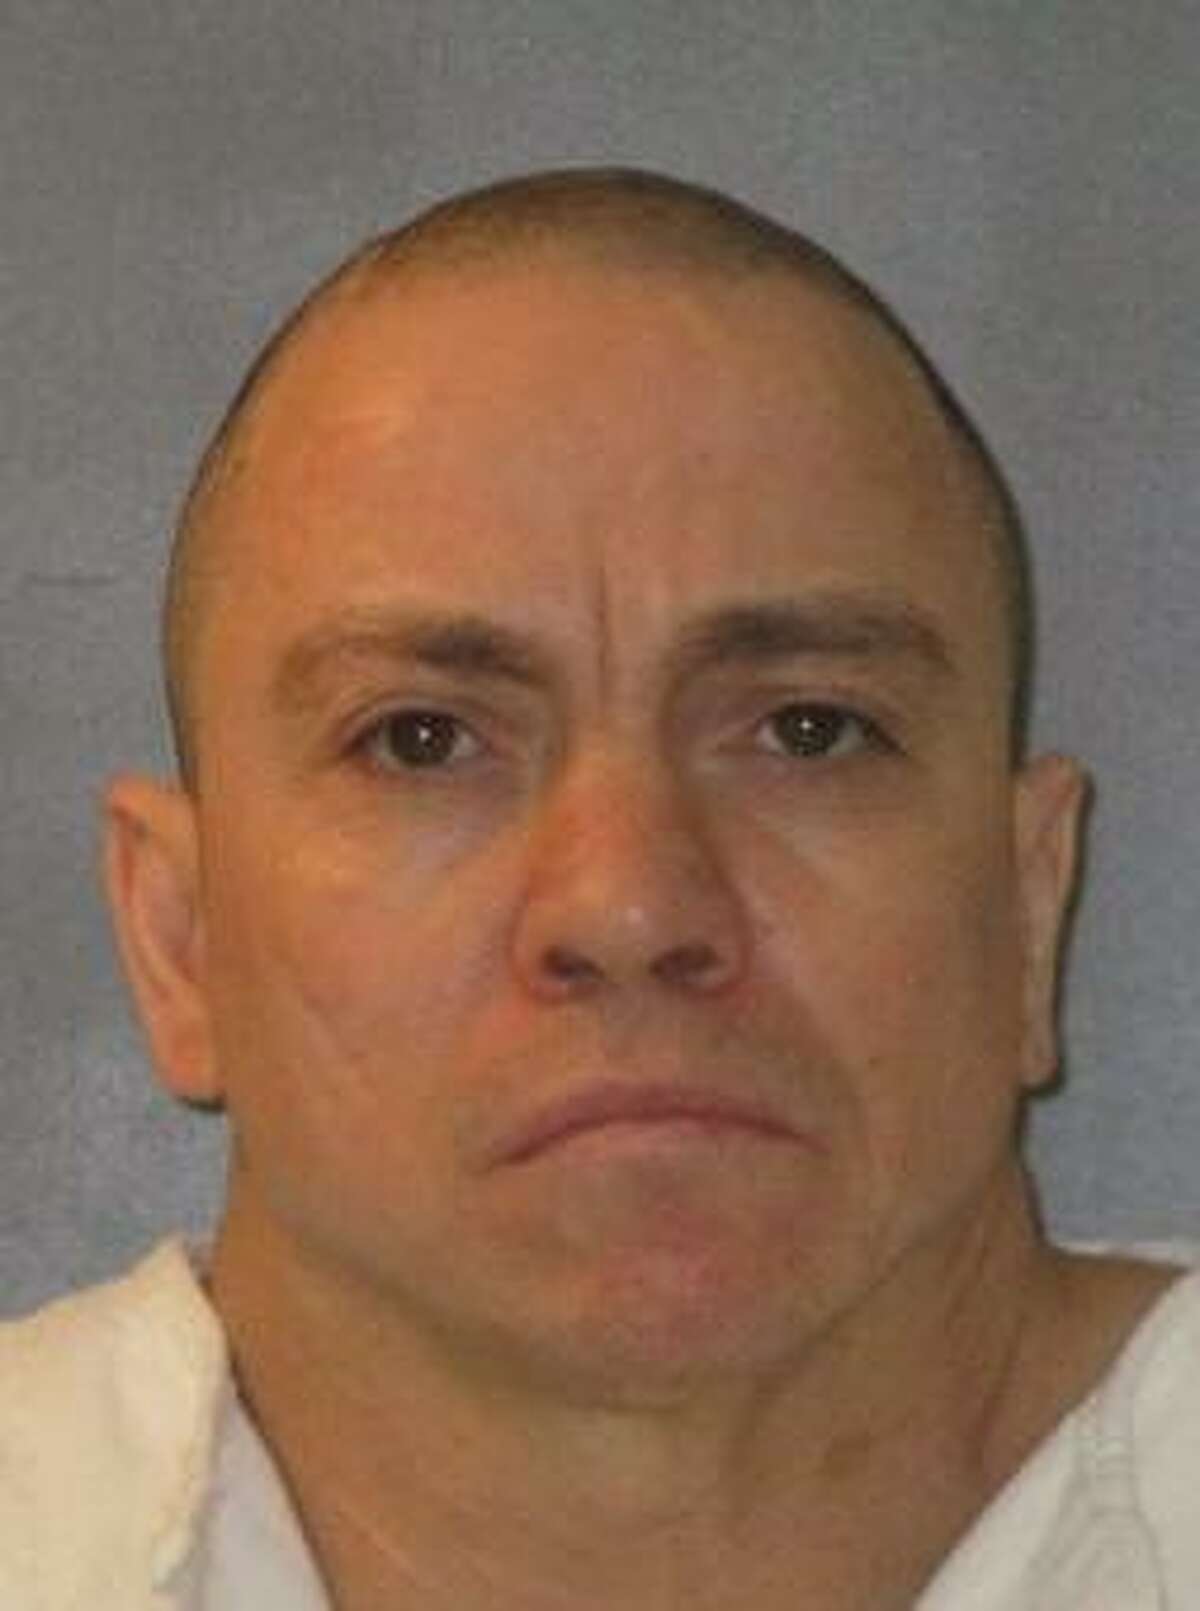 Mexican national Ignacio Gomez died of cardiac arrest after more than two decades on Texas death row.